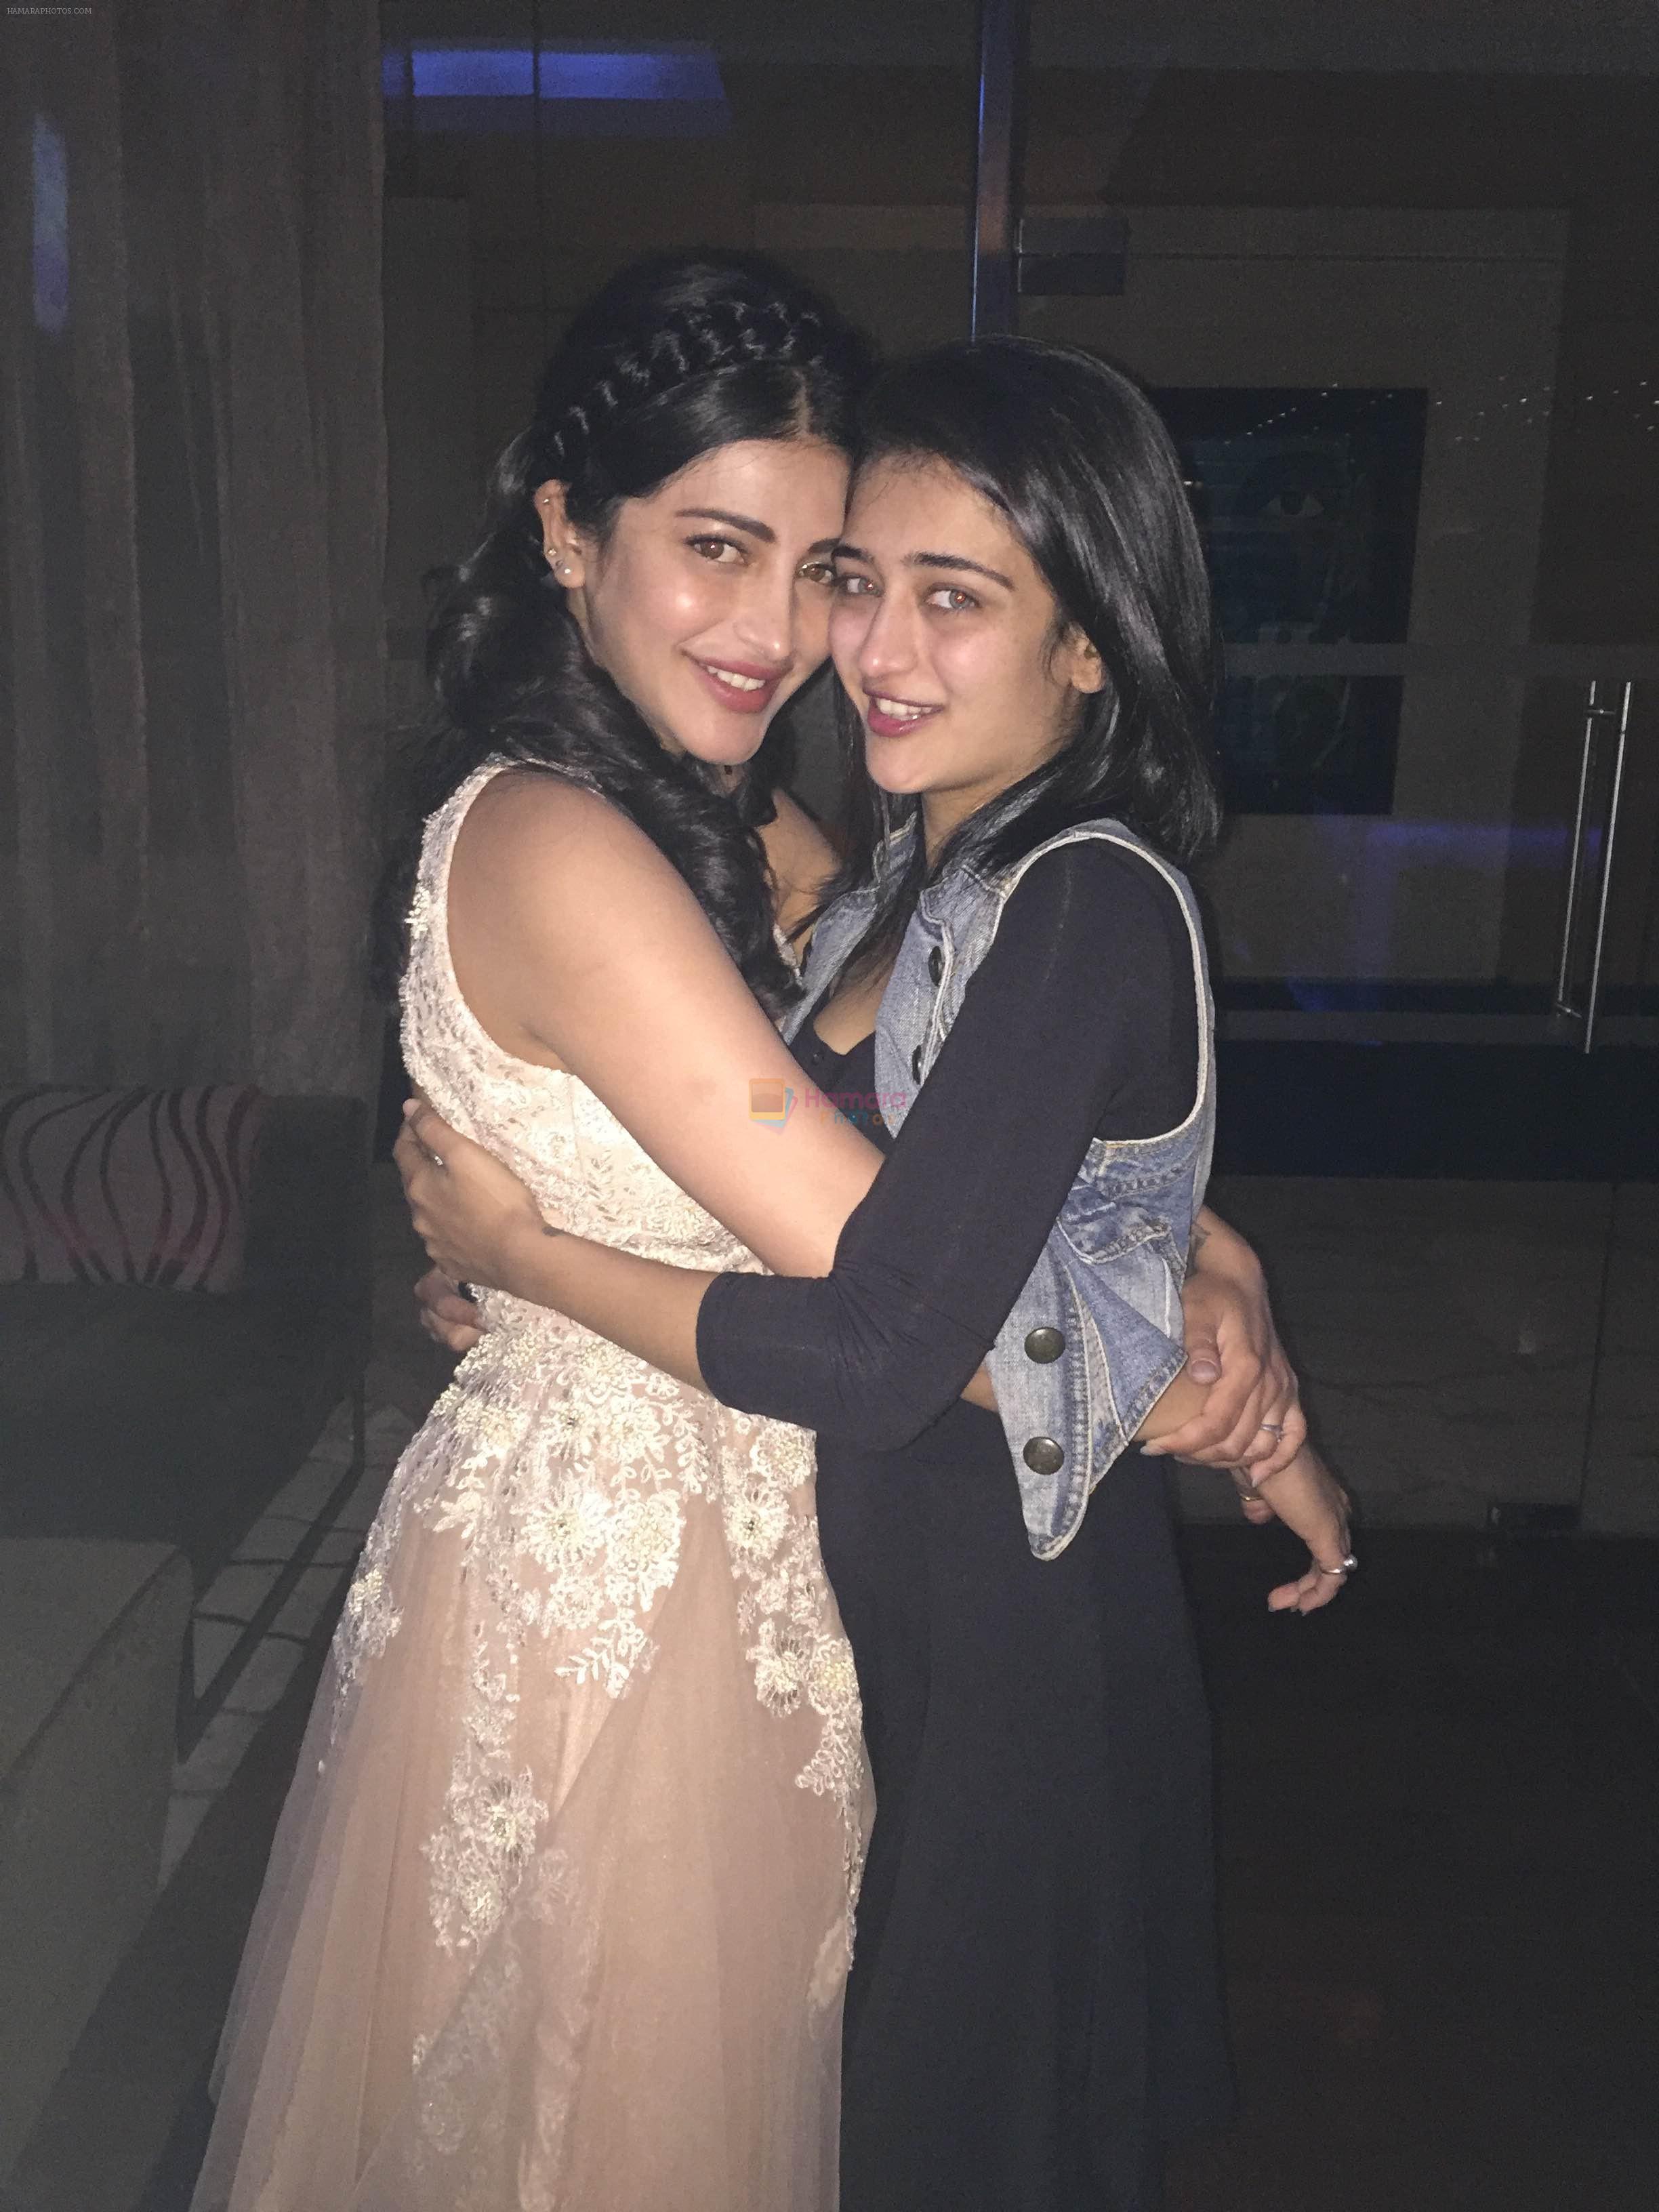 Shruti Haasan hosted a private party on her birthday in Chennai for her family and friends on 30th Jan 2016